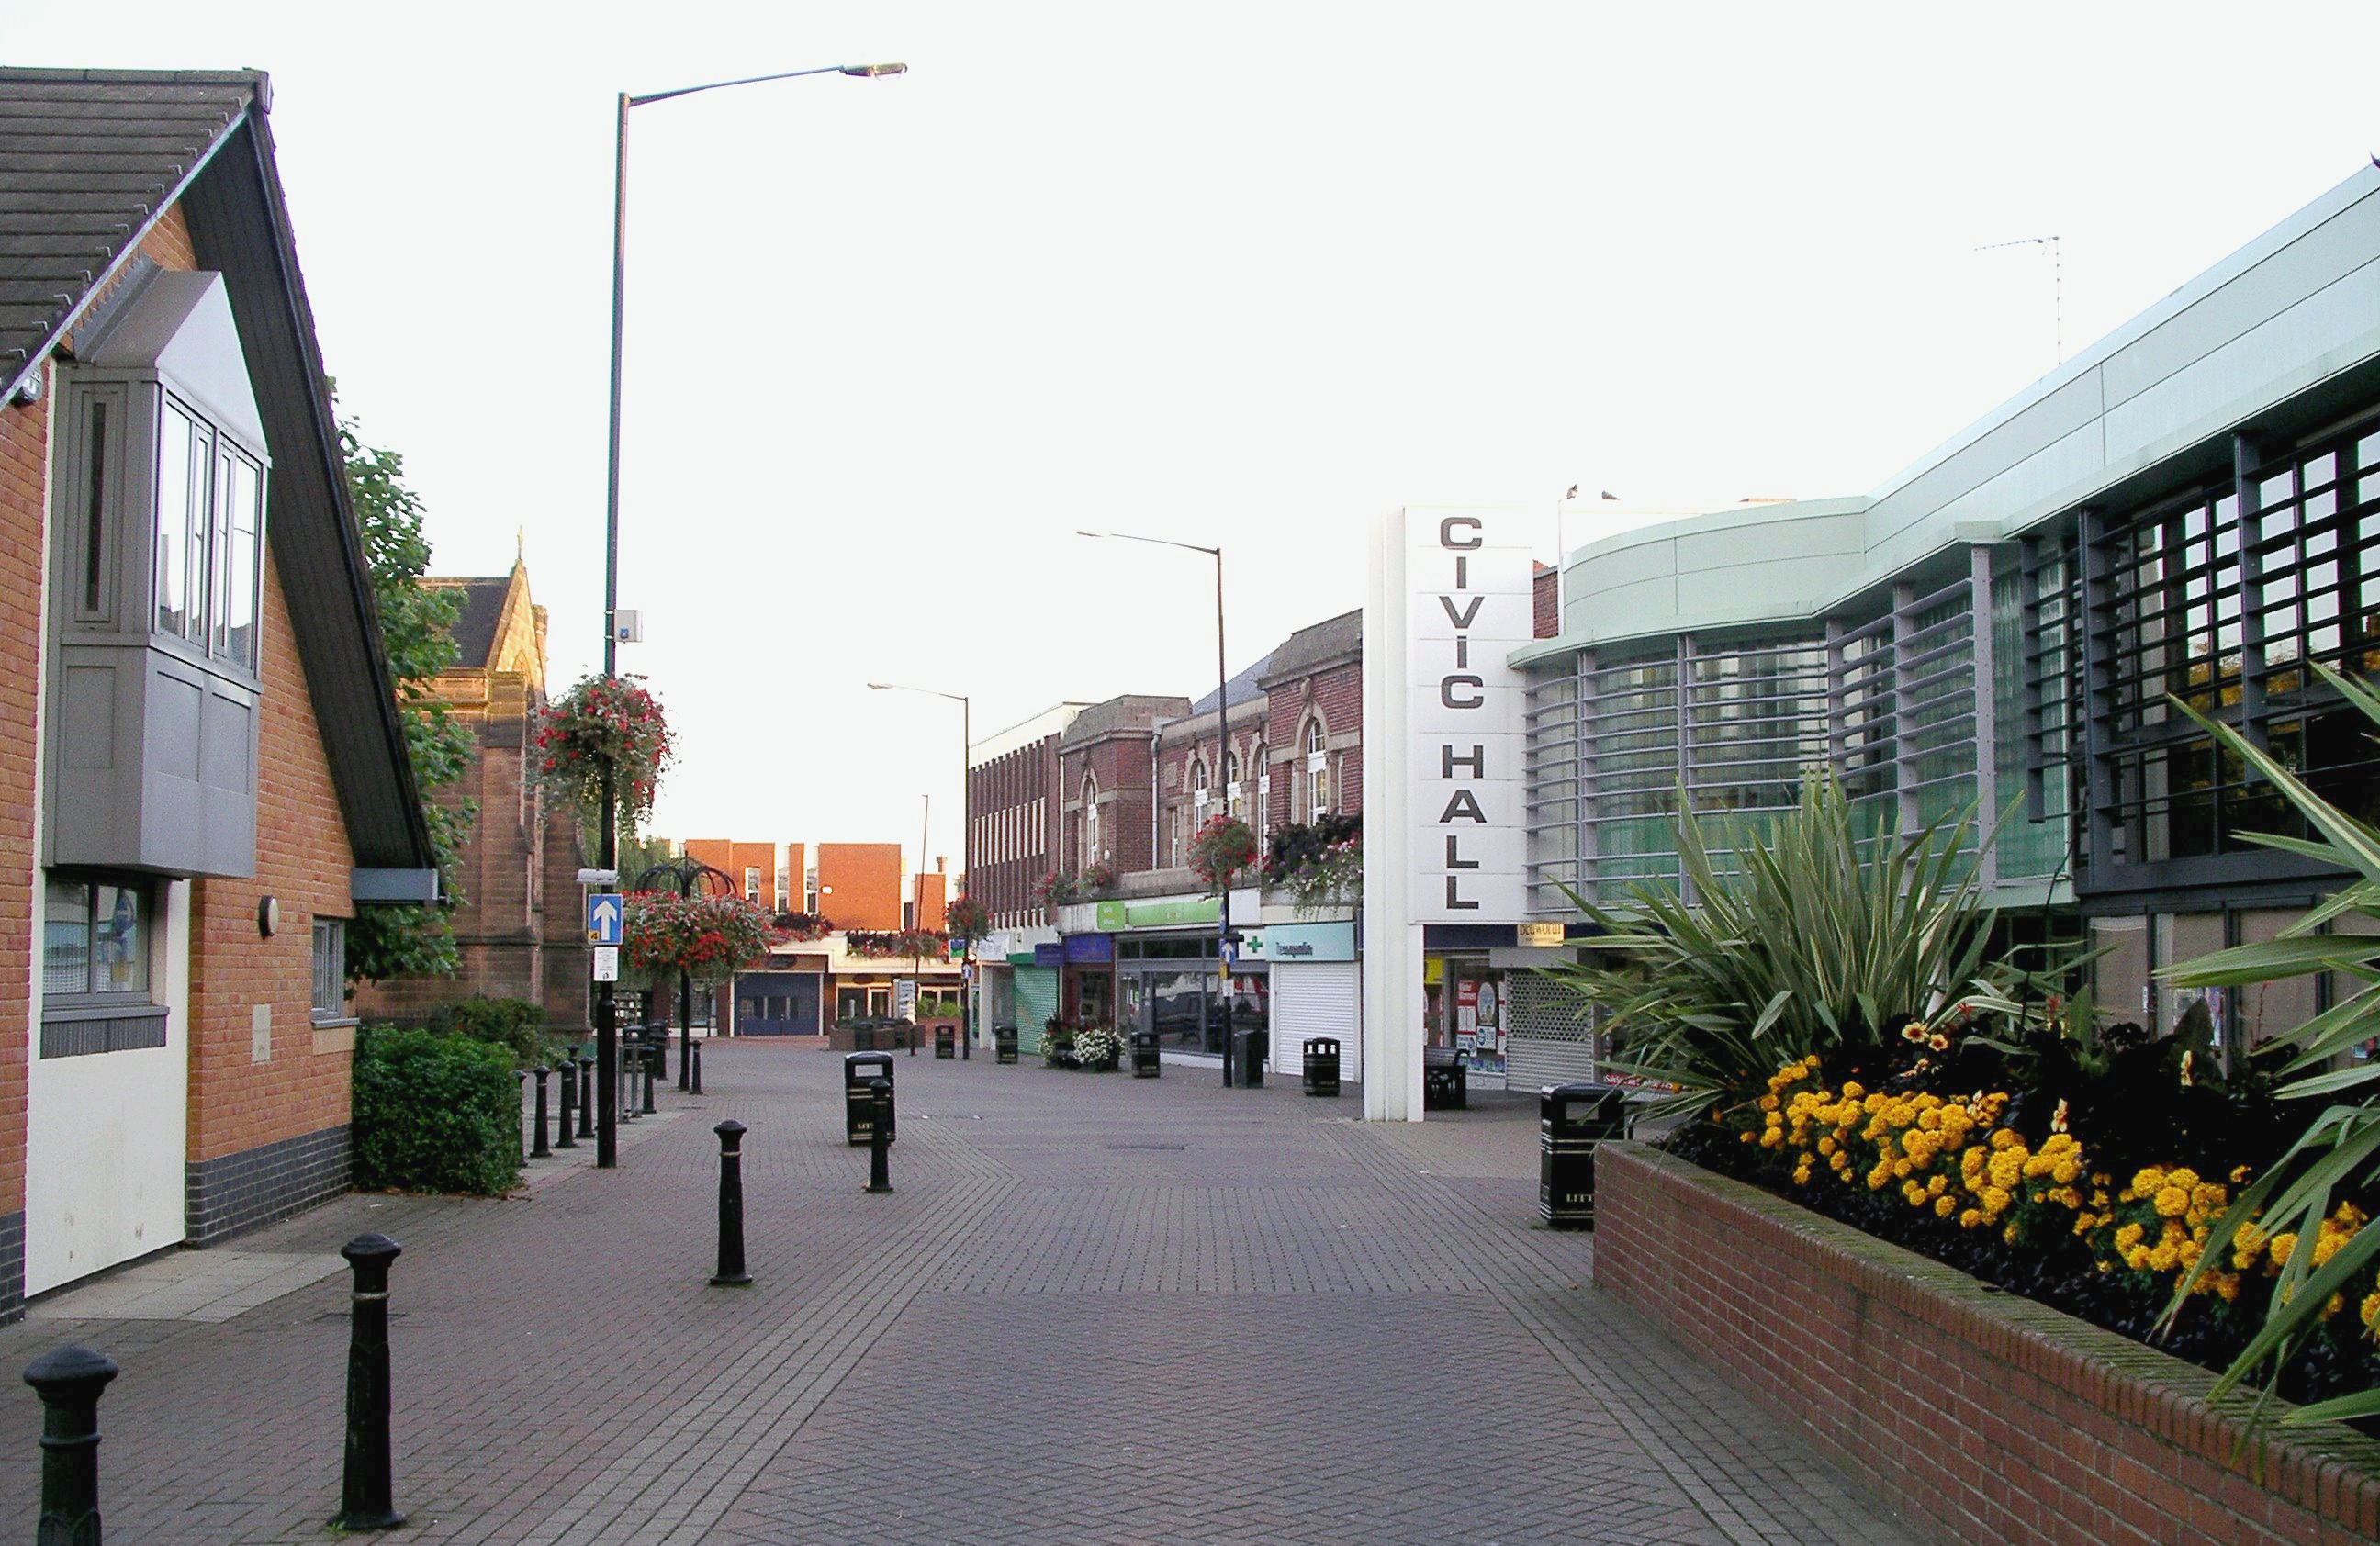 34-facts-about-coventry-bedworth